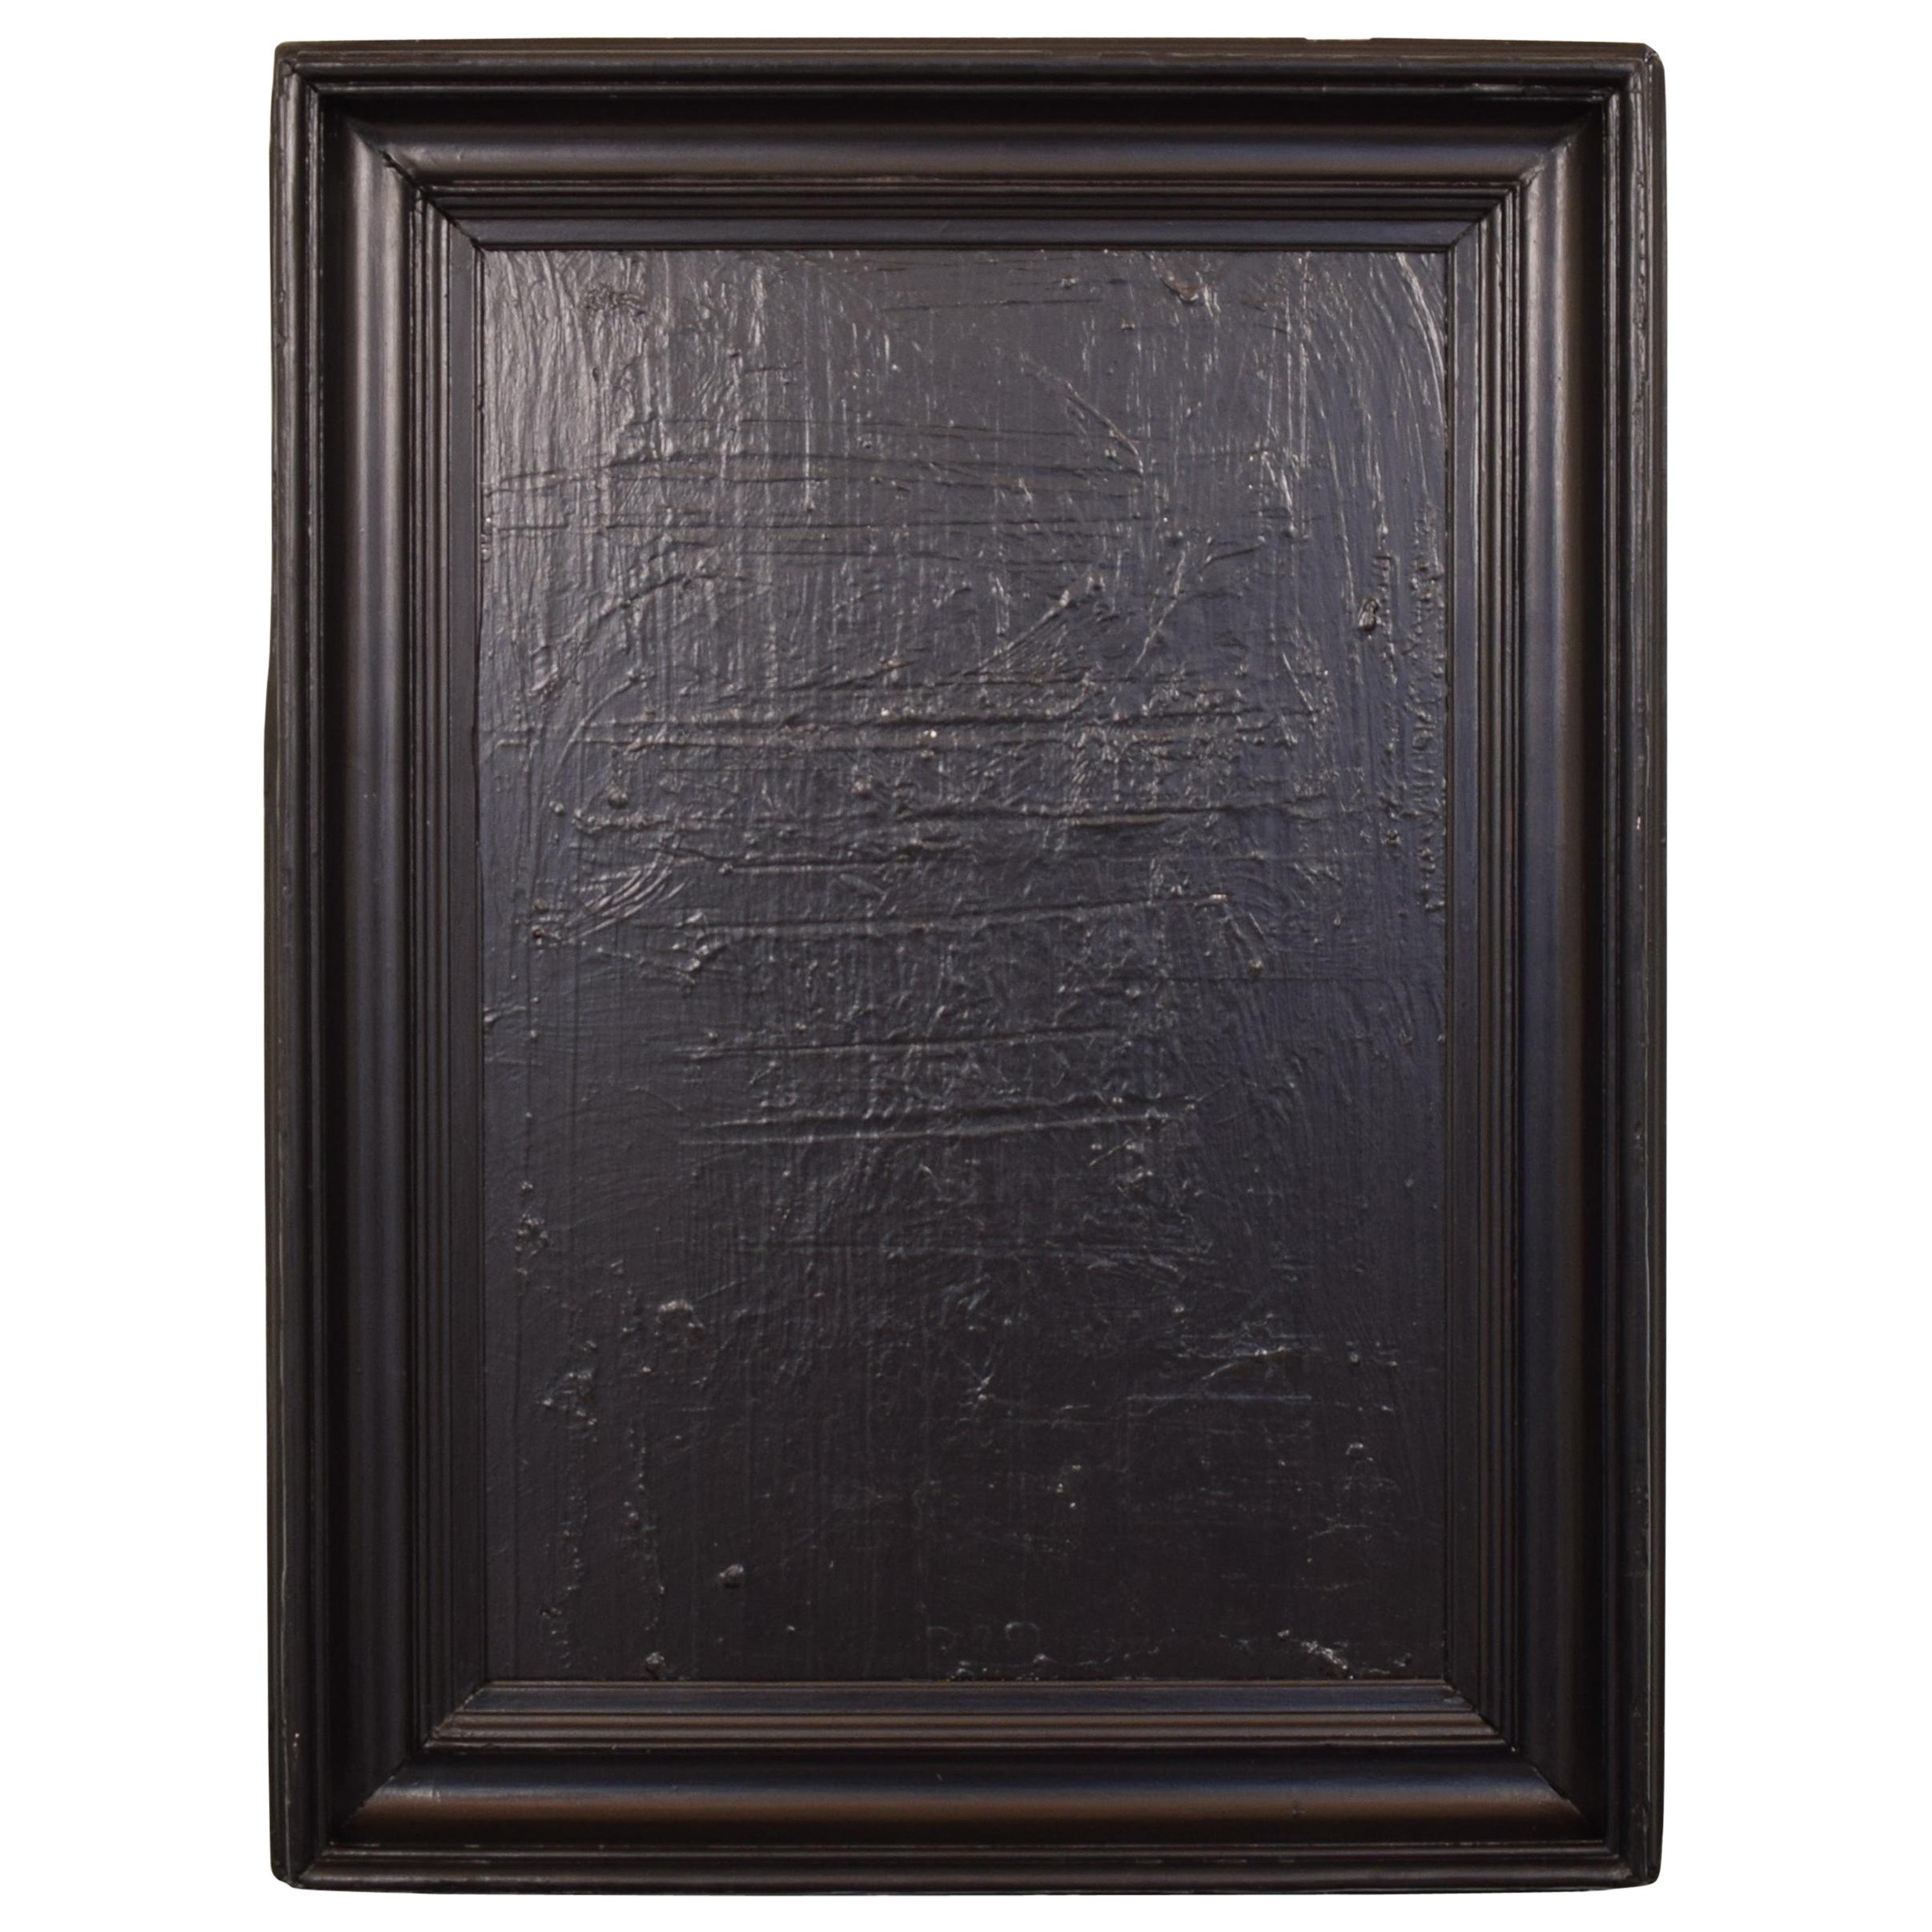 Contemporary Modern Black Abstract Painting on Canvas in a Old Frame